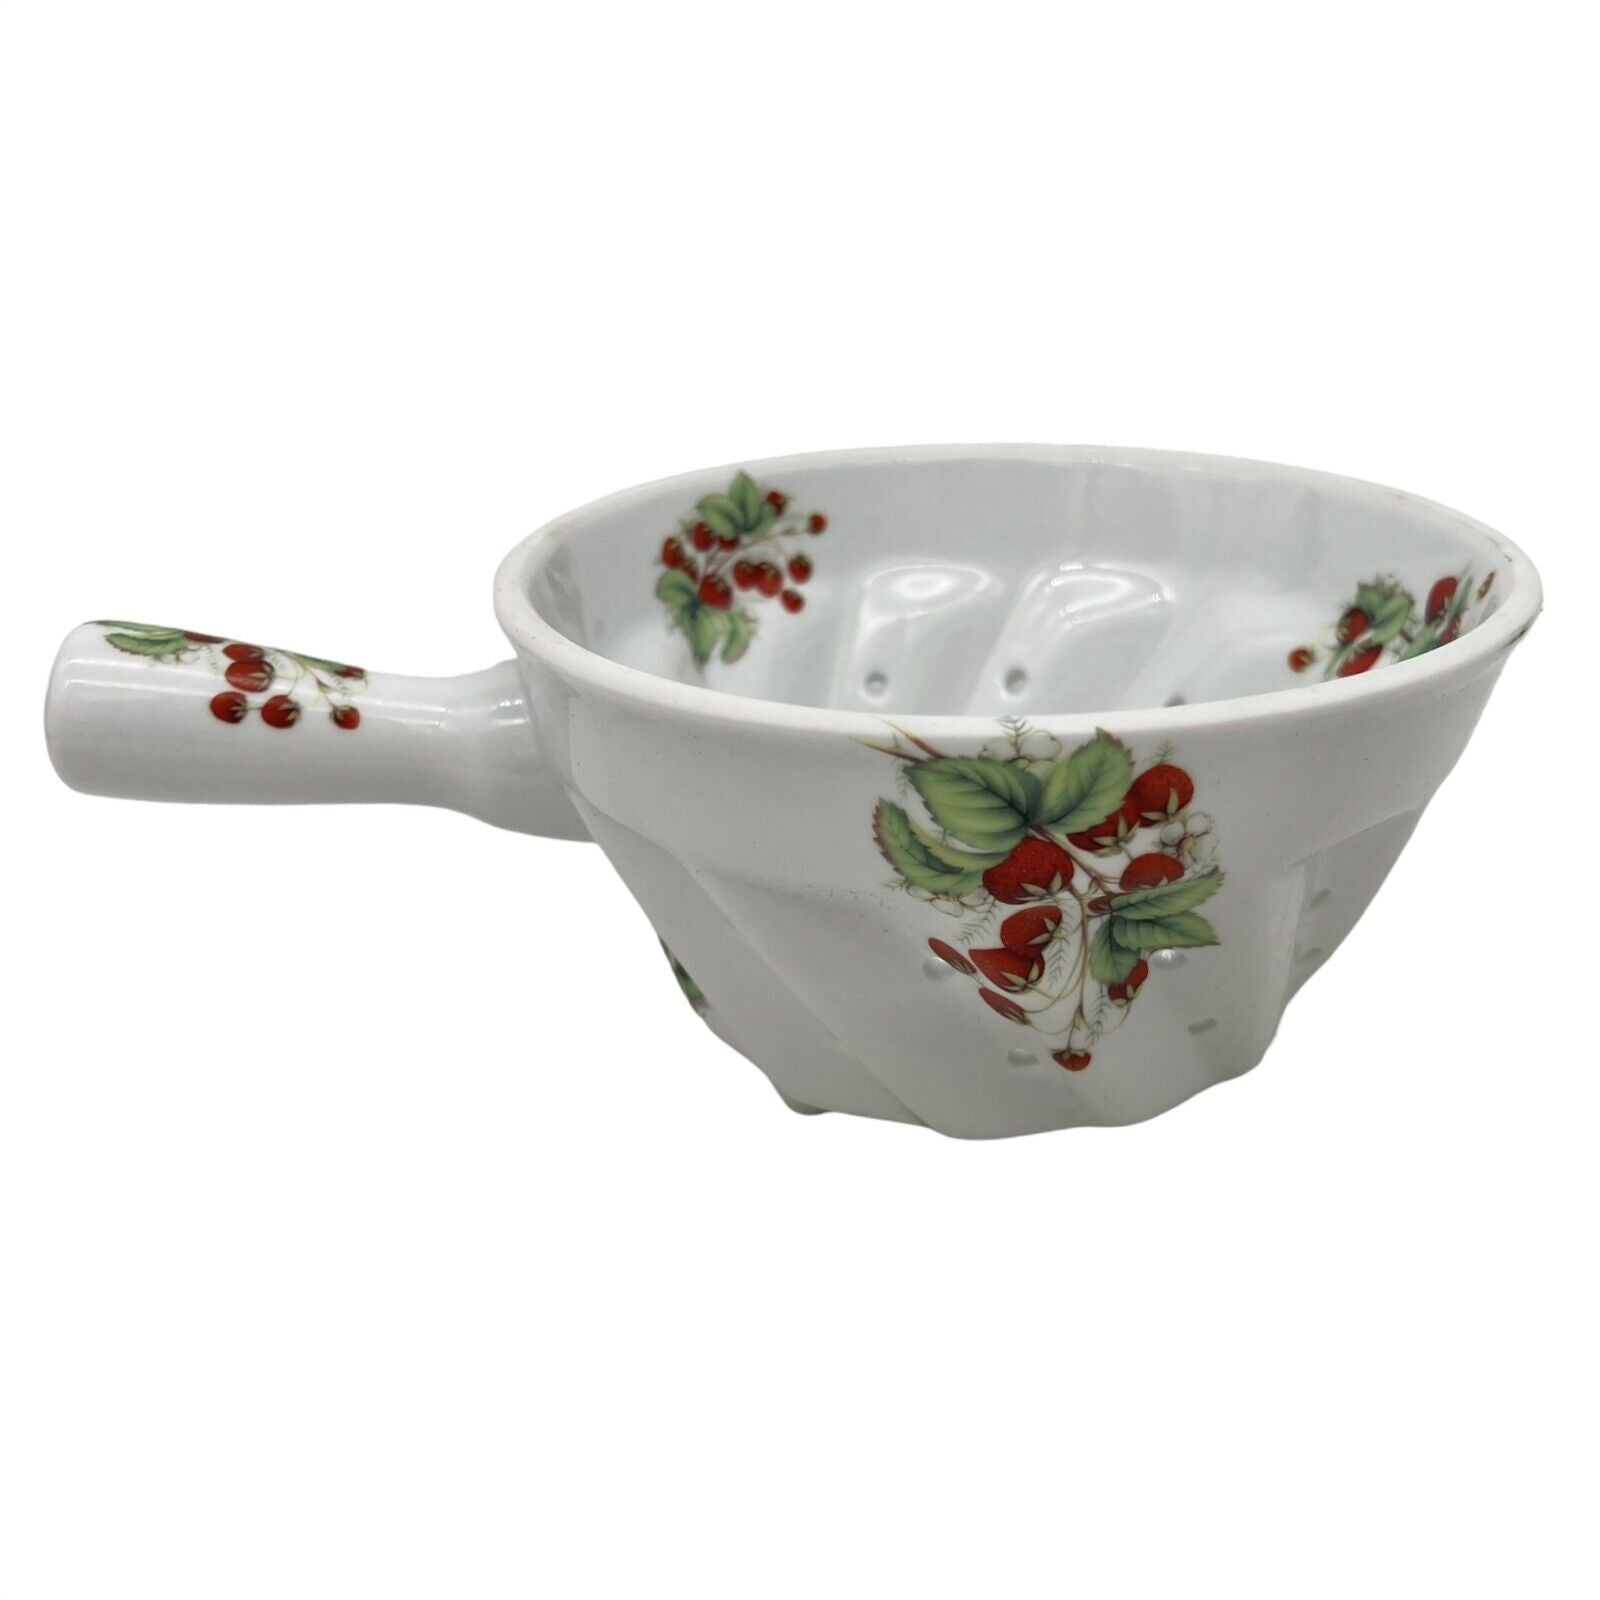 French porcelain jam colander sold by All Things French Store